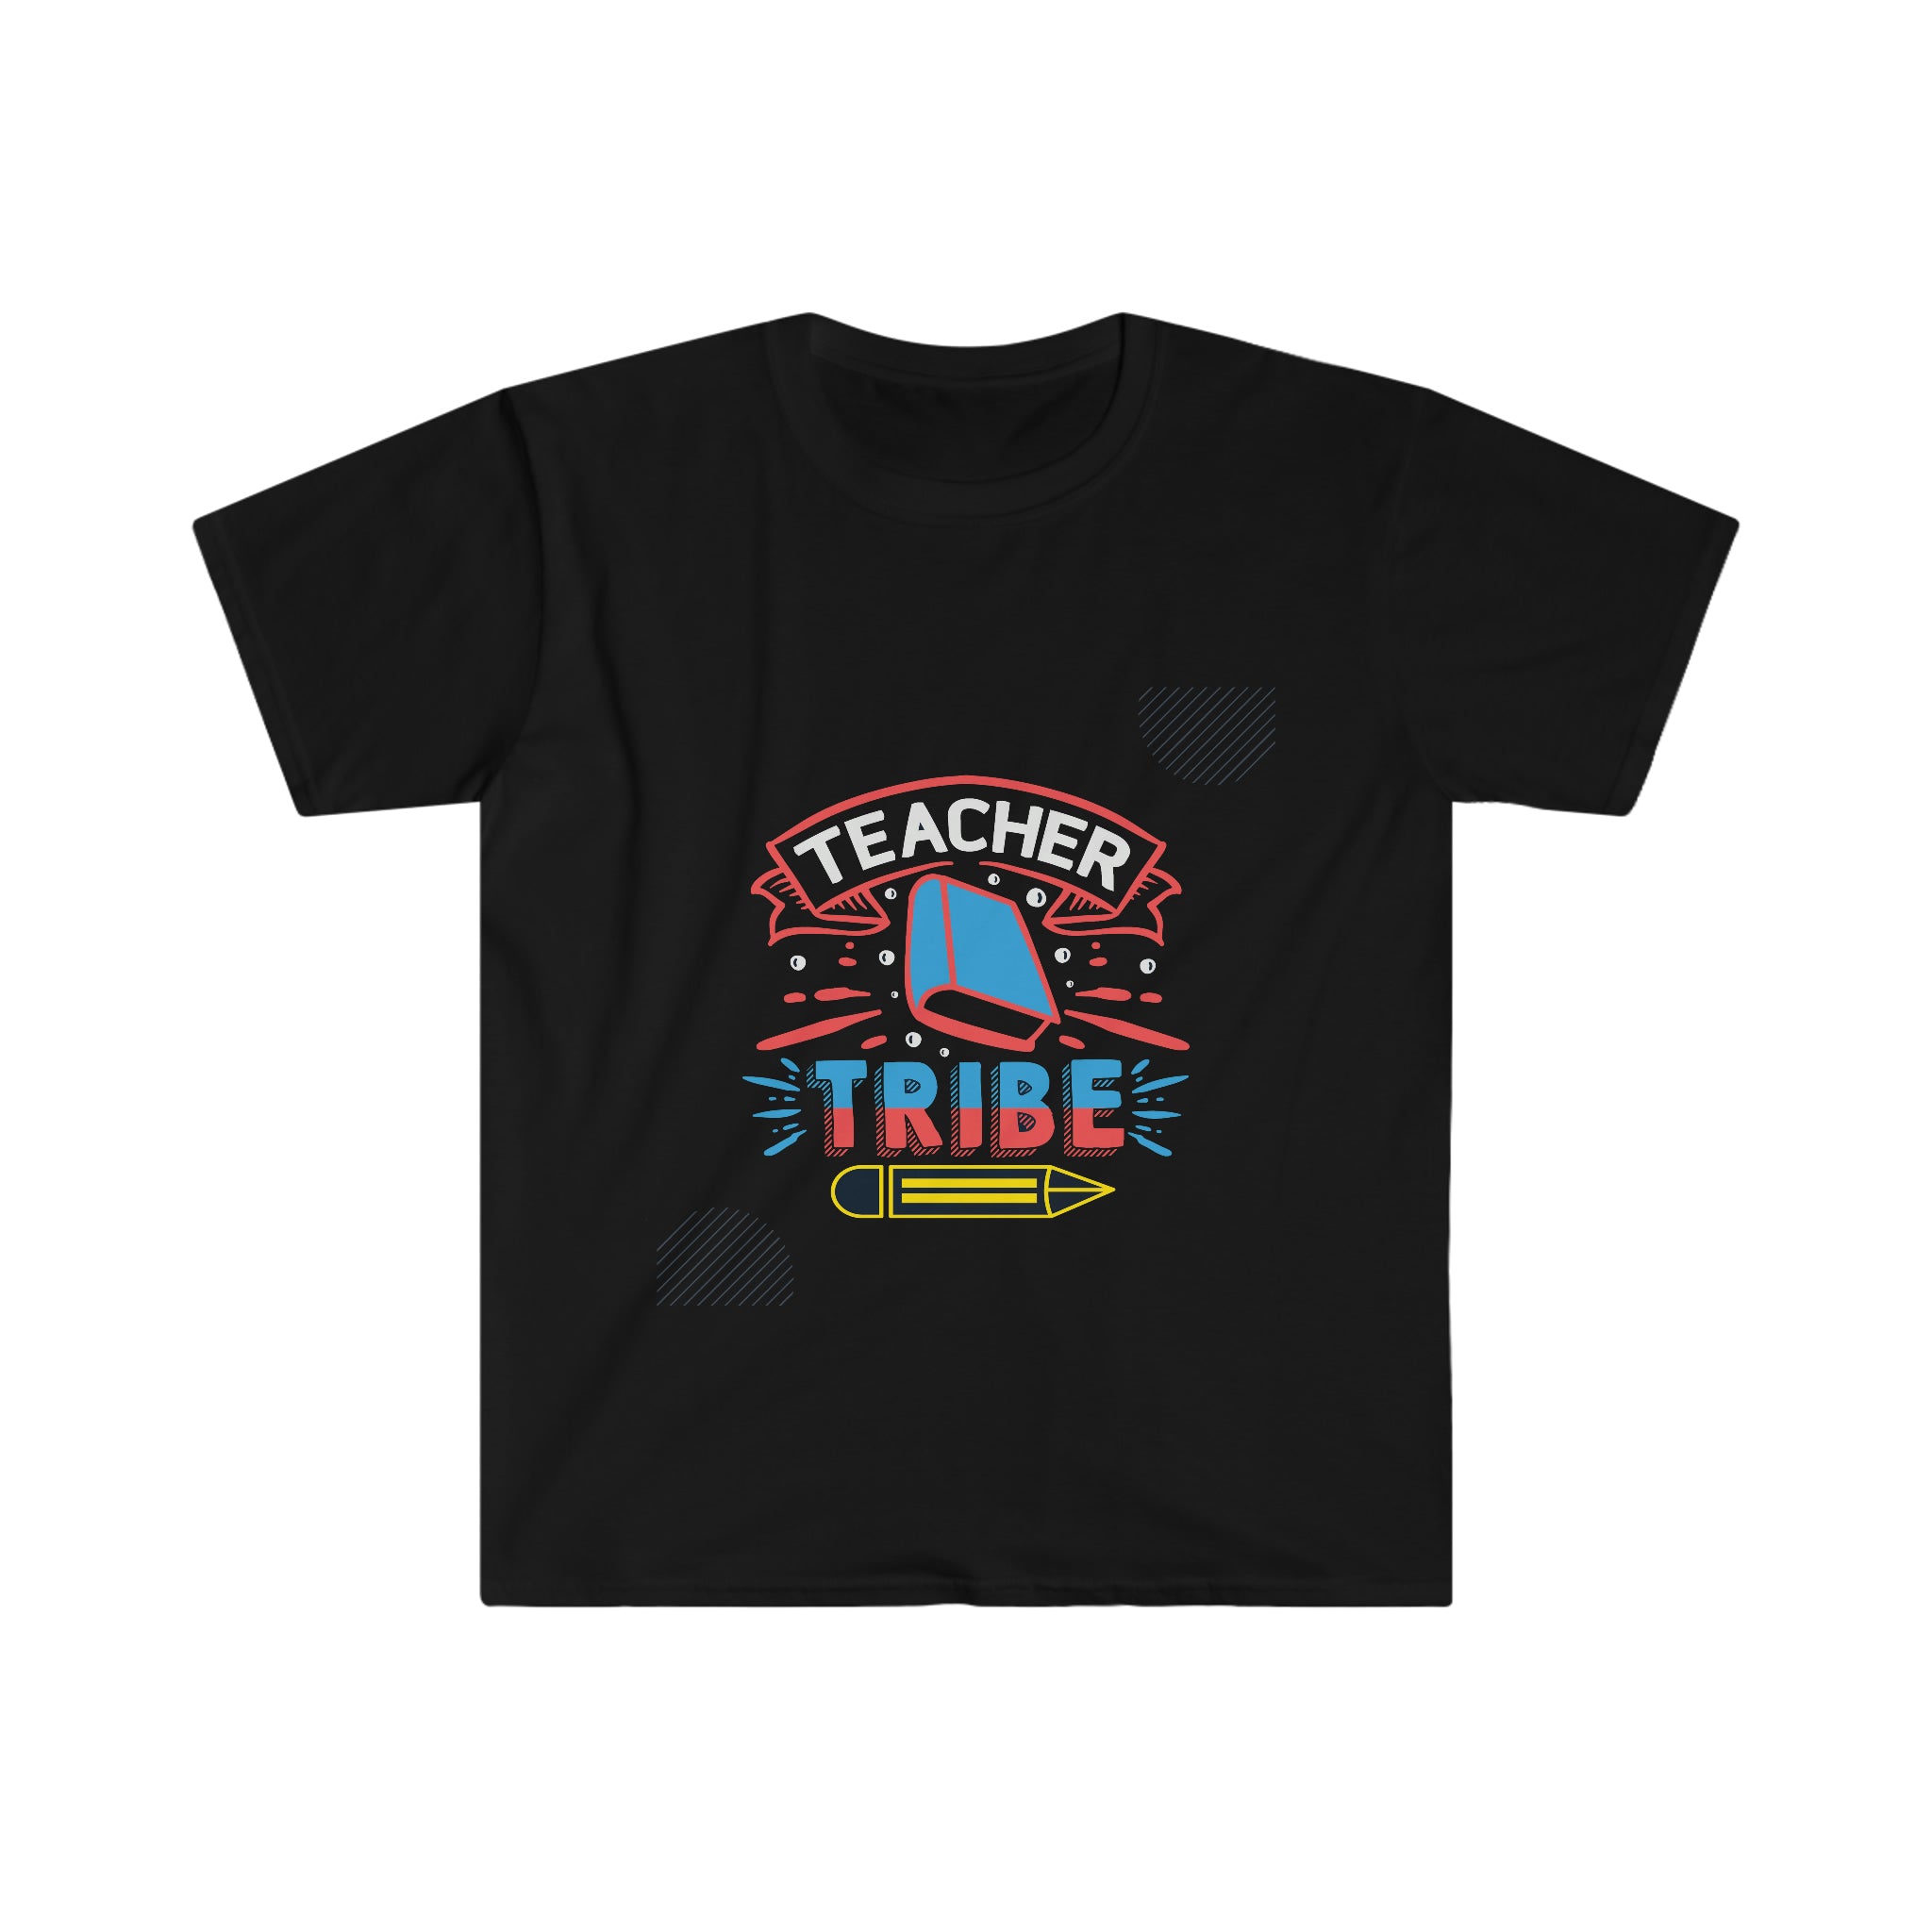 Show your school pride with this Teacher's Tribe T-Shirt that proudly states "Teacher's Tribe.